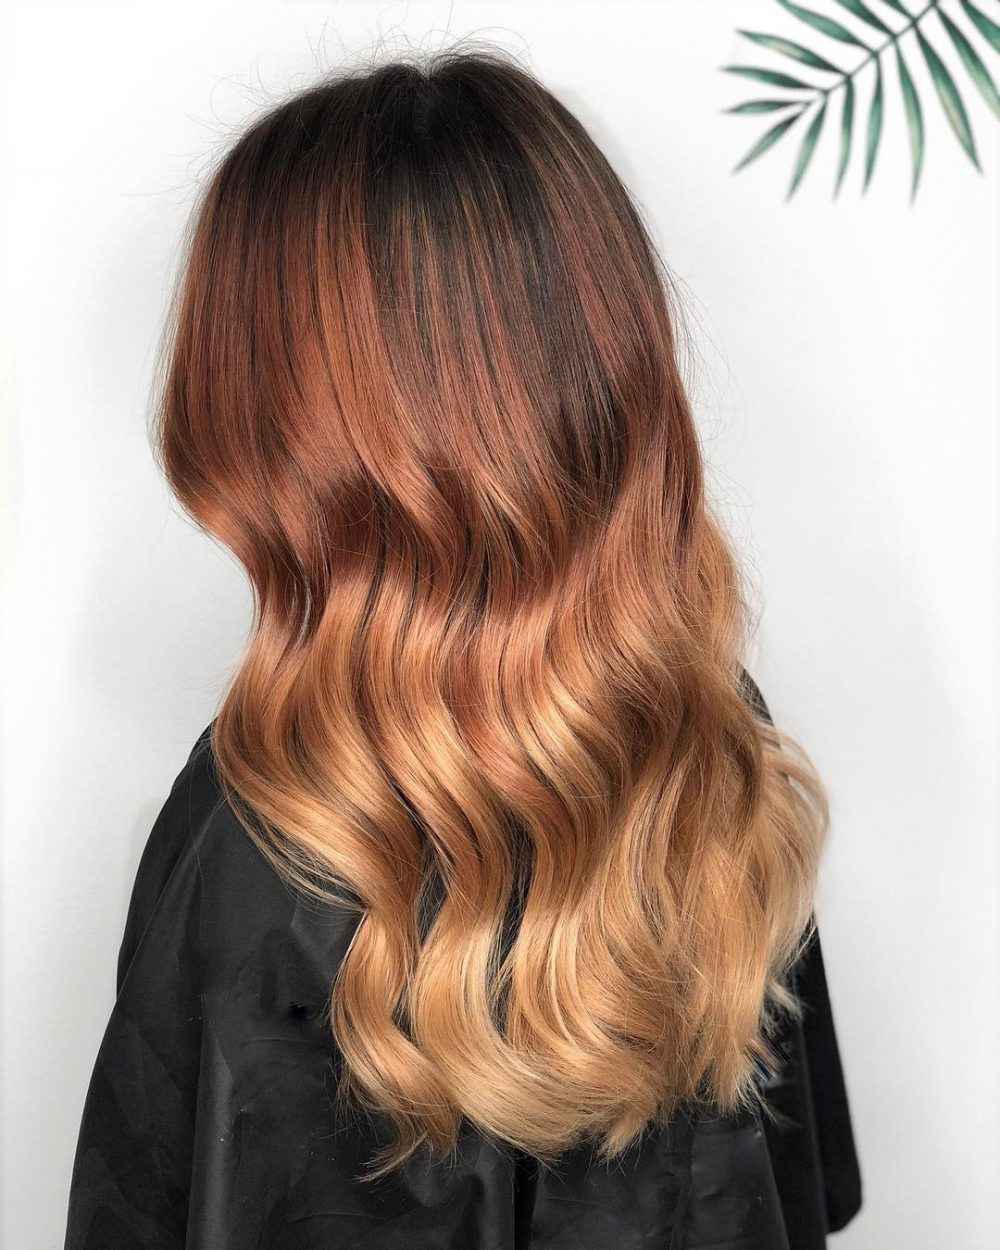 Melted Auburn Waves hairstyle